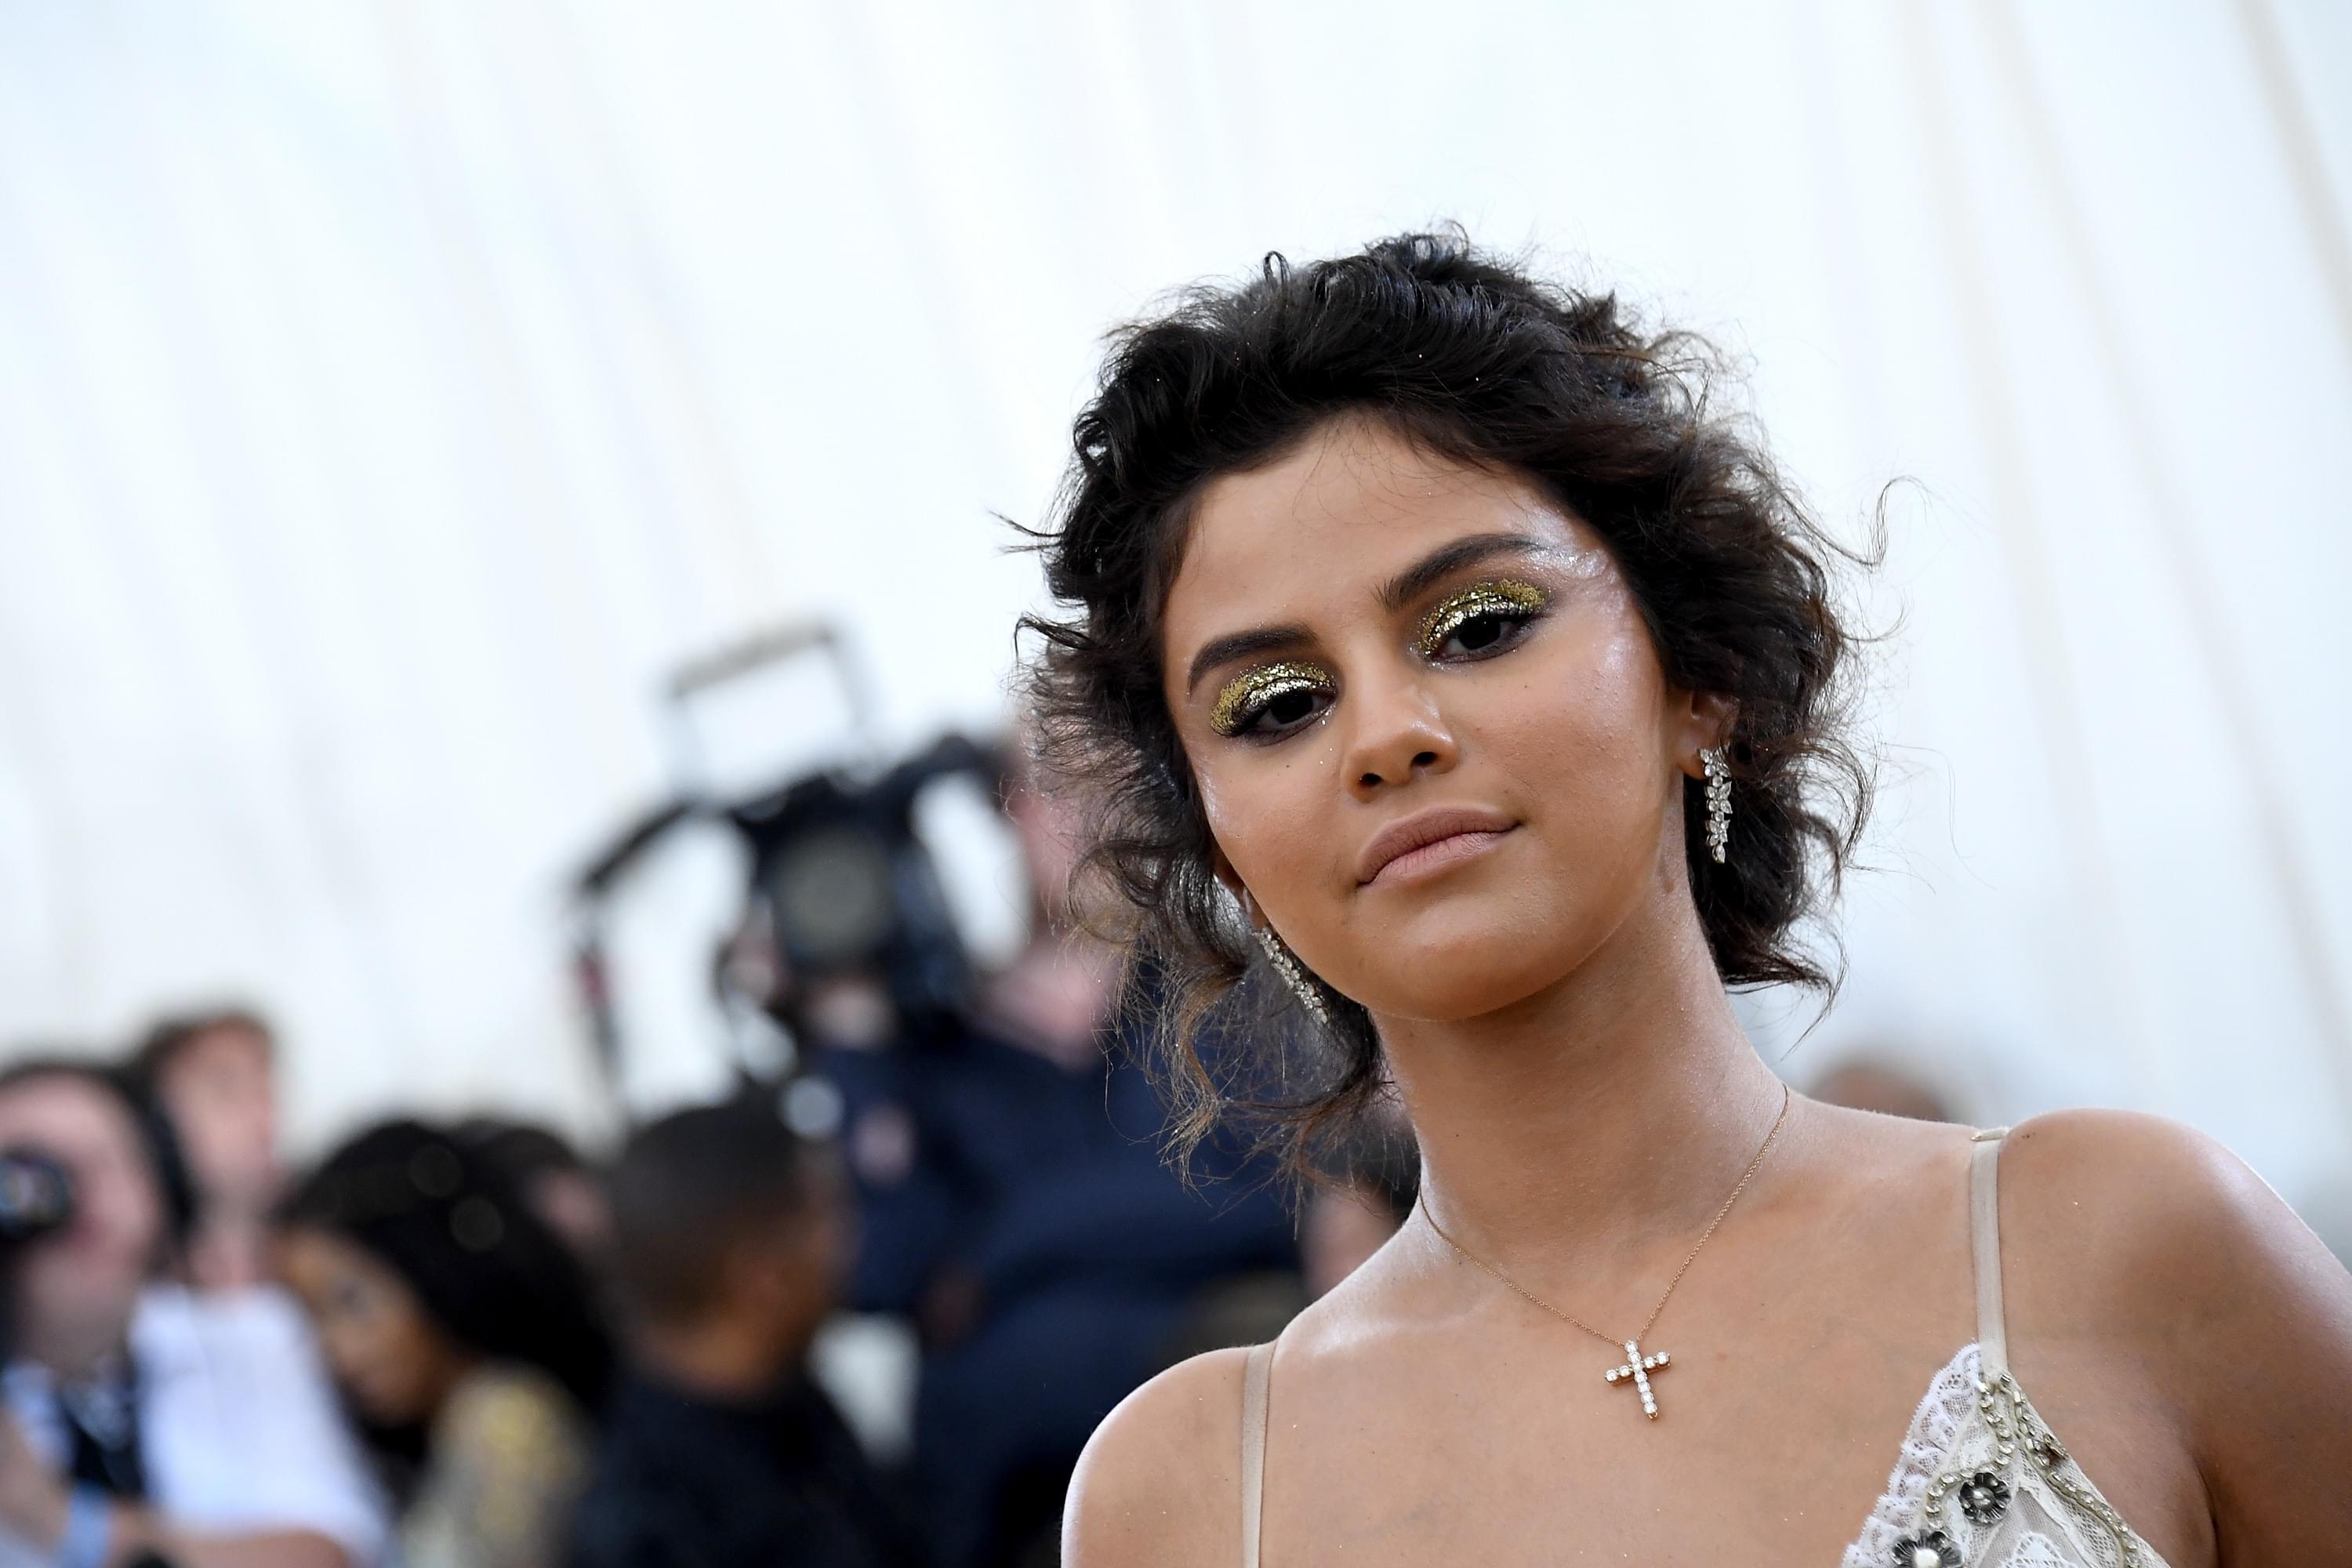 You’ll Never Guess Who Selena Gomez Is Dating In New Music Video